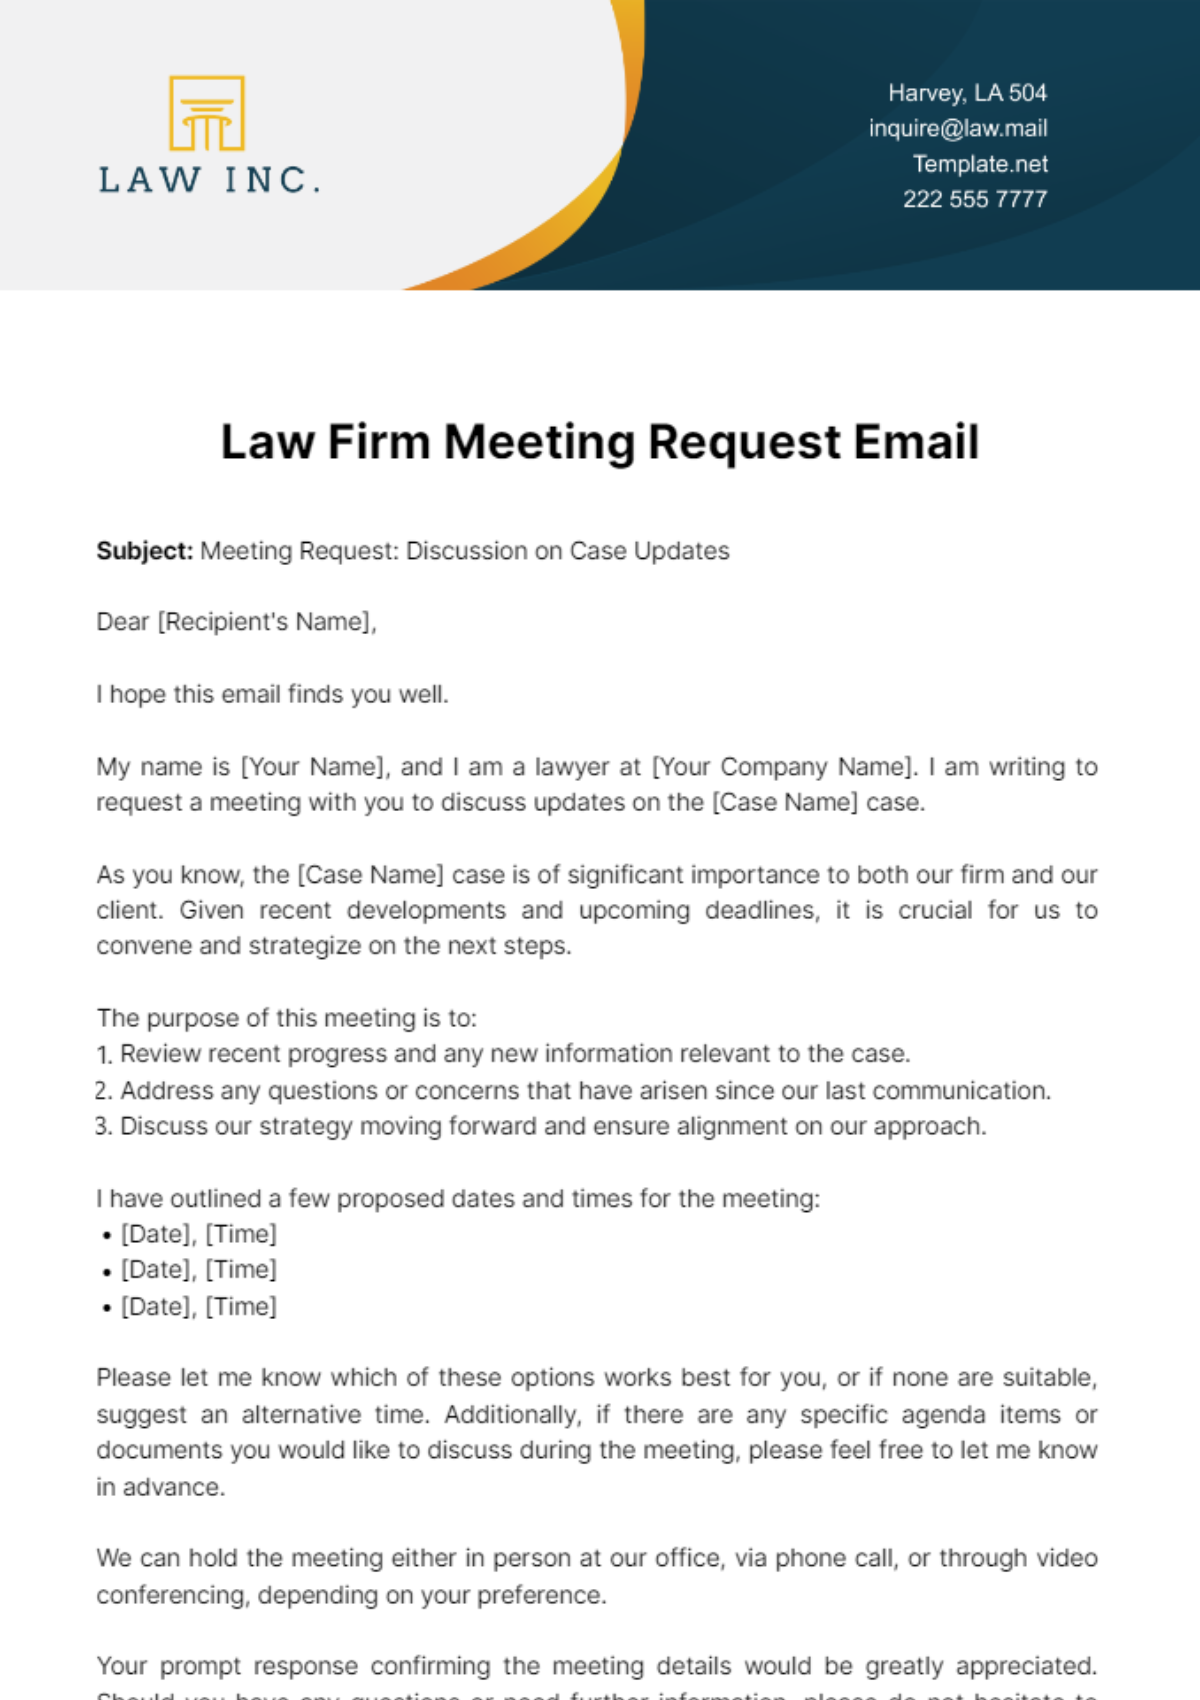 Free Law Firm Meeting Request Email Template